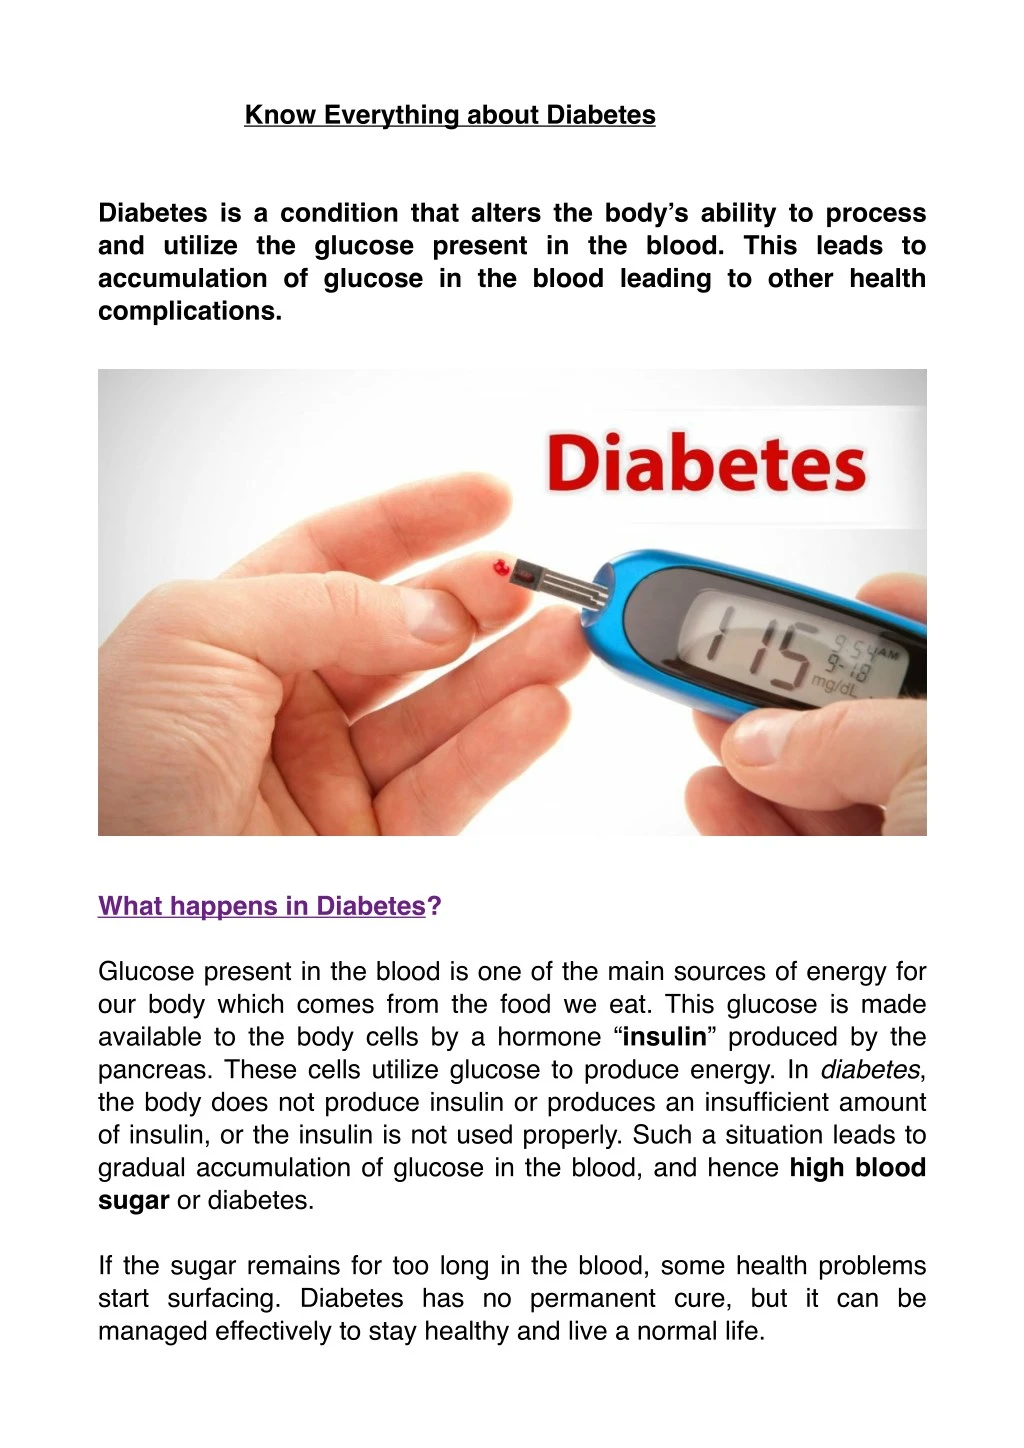 know everything about diabetes